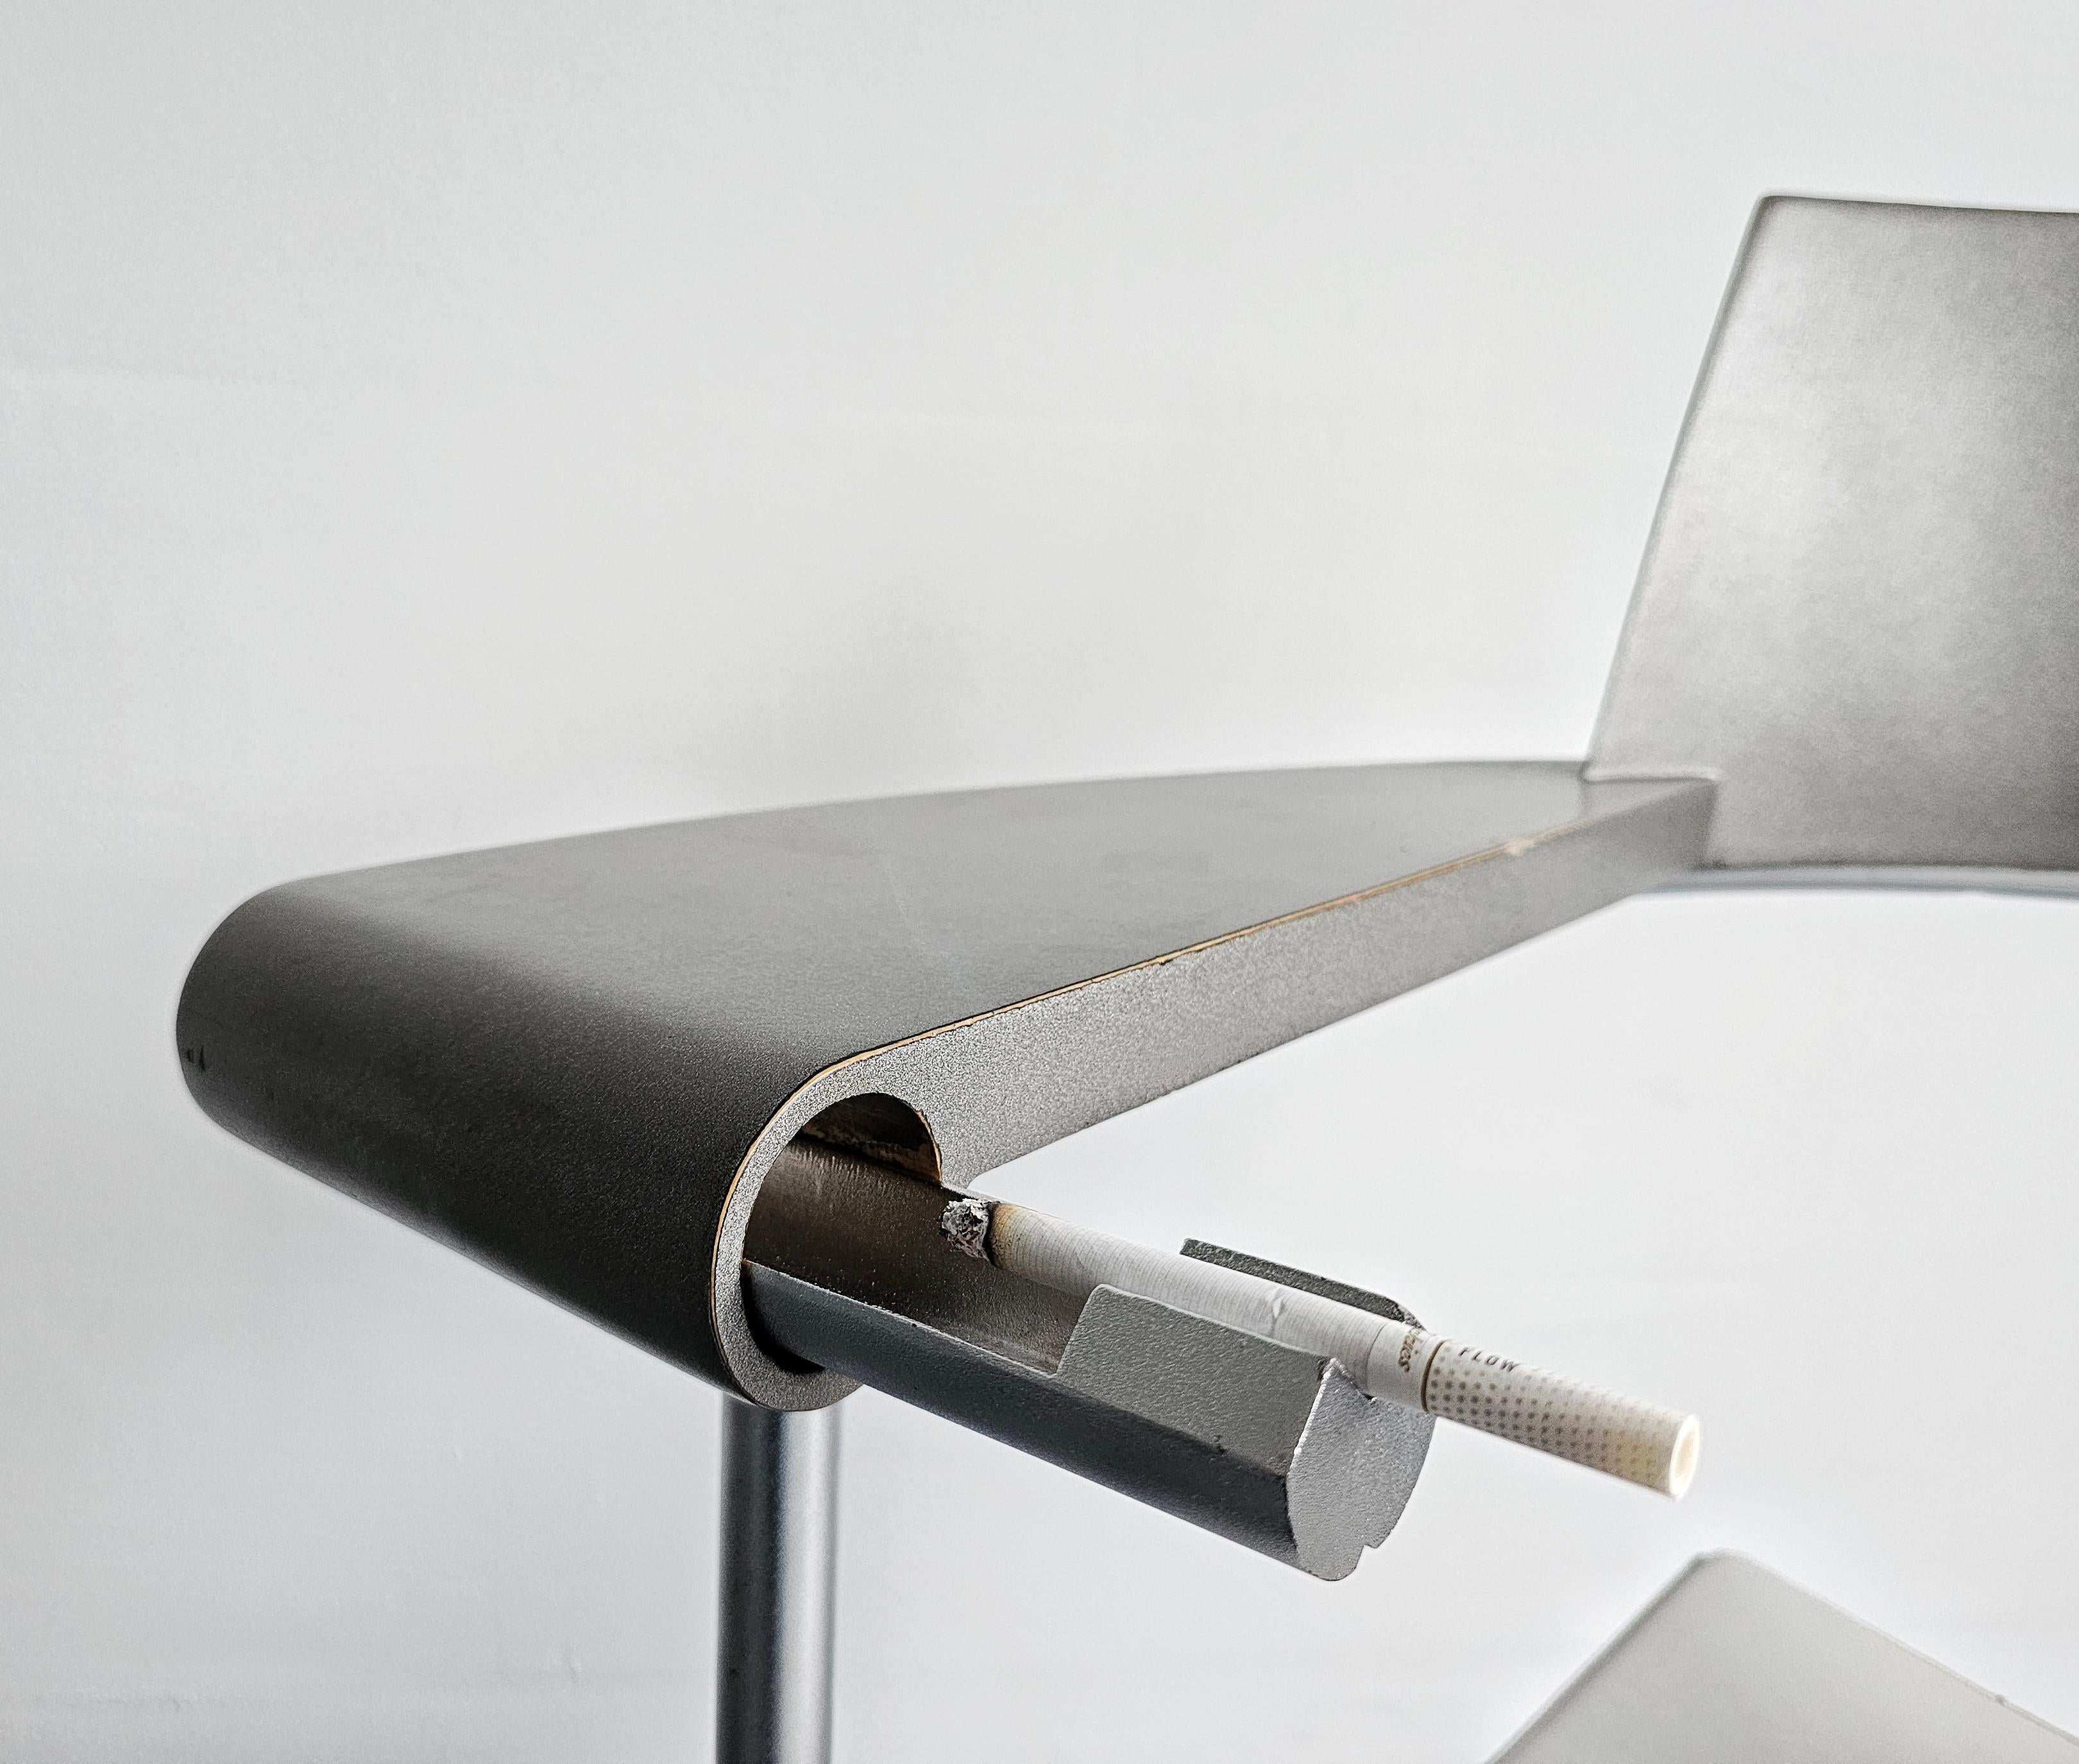 Aluminum TECHNO barber chair designed by Philippe Starck for L'Oreal, France 1989 For Sale